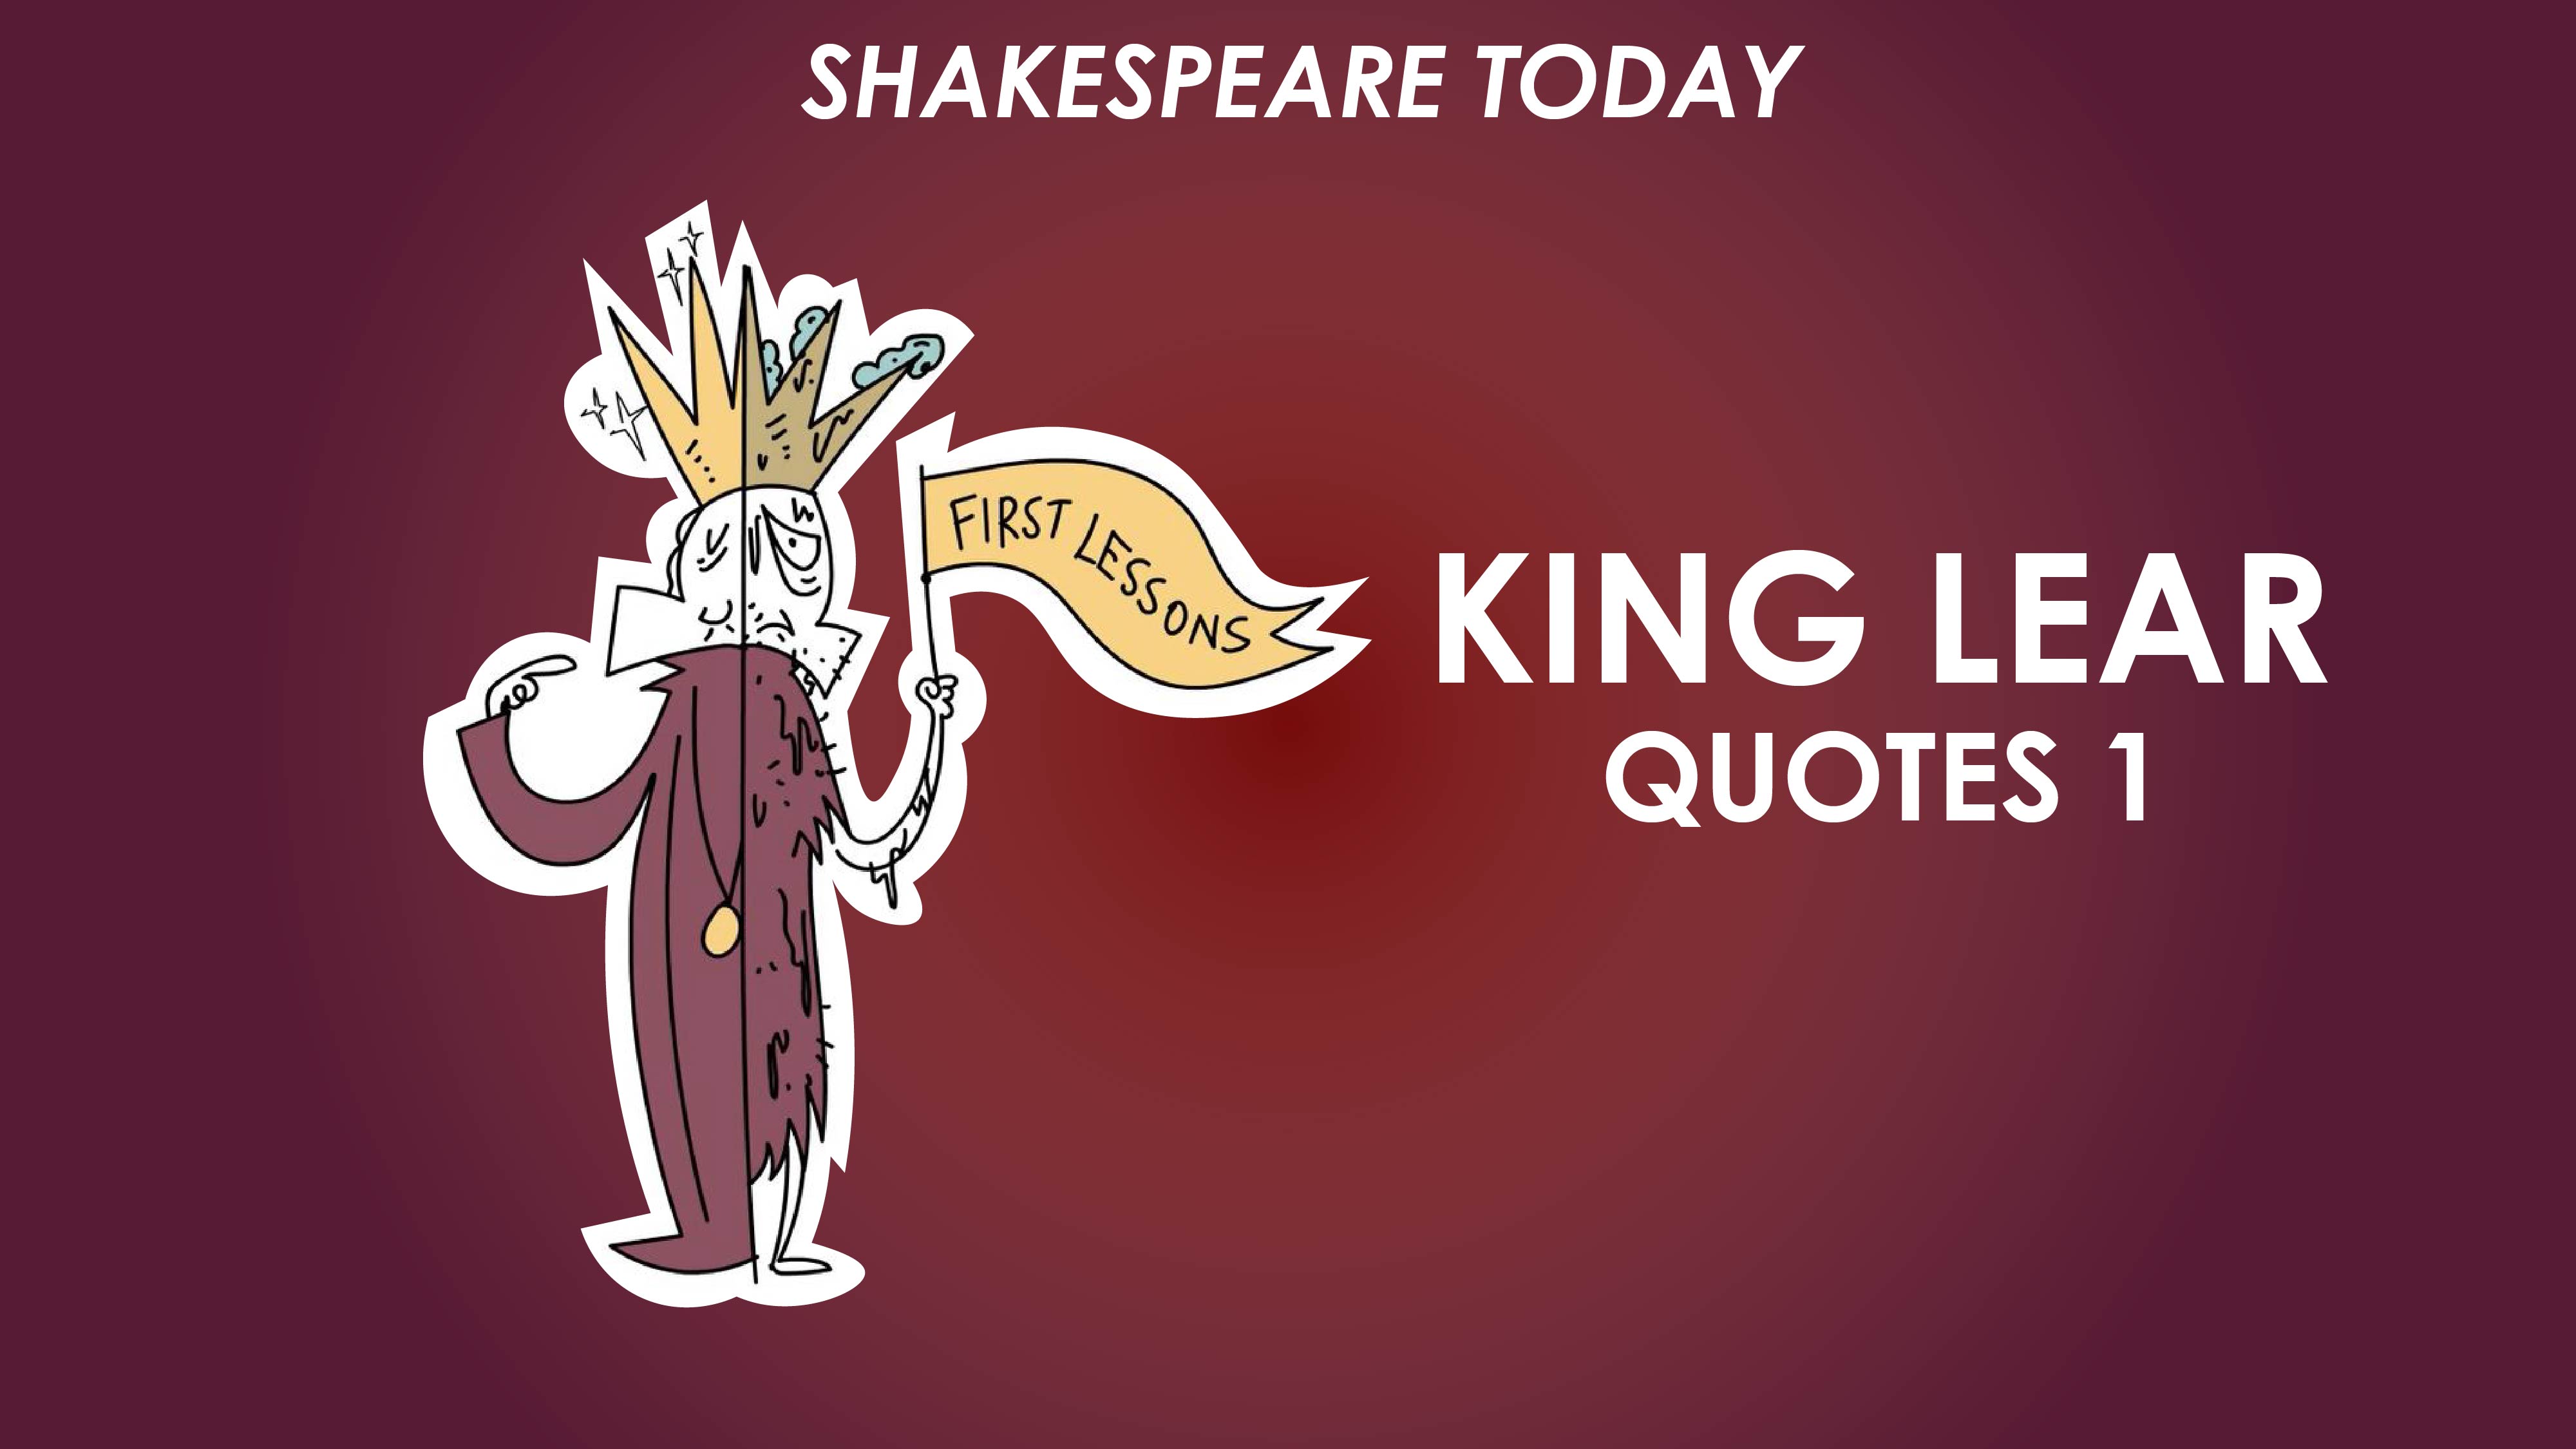 King Lear Key Quotes Analysis Part 1